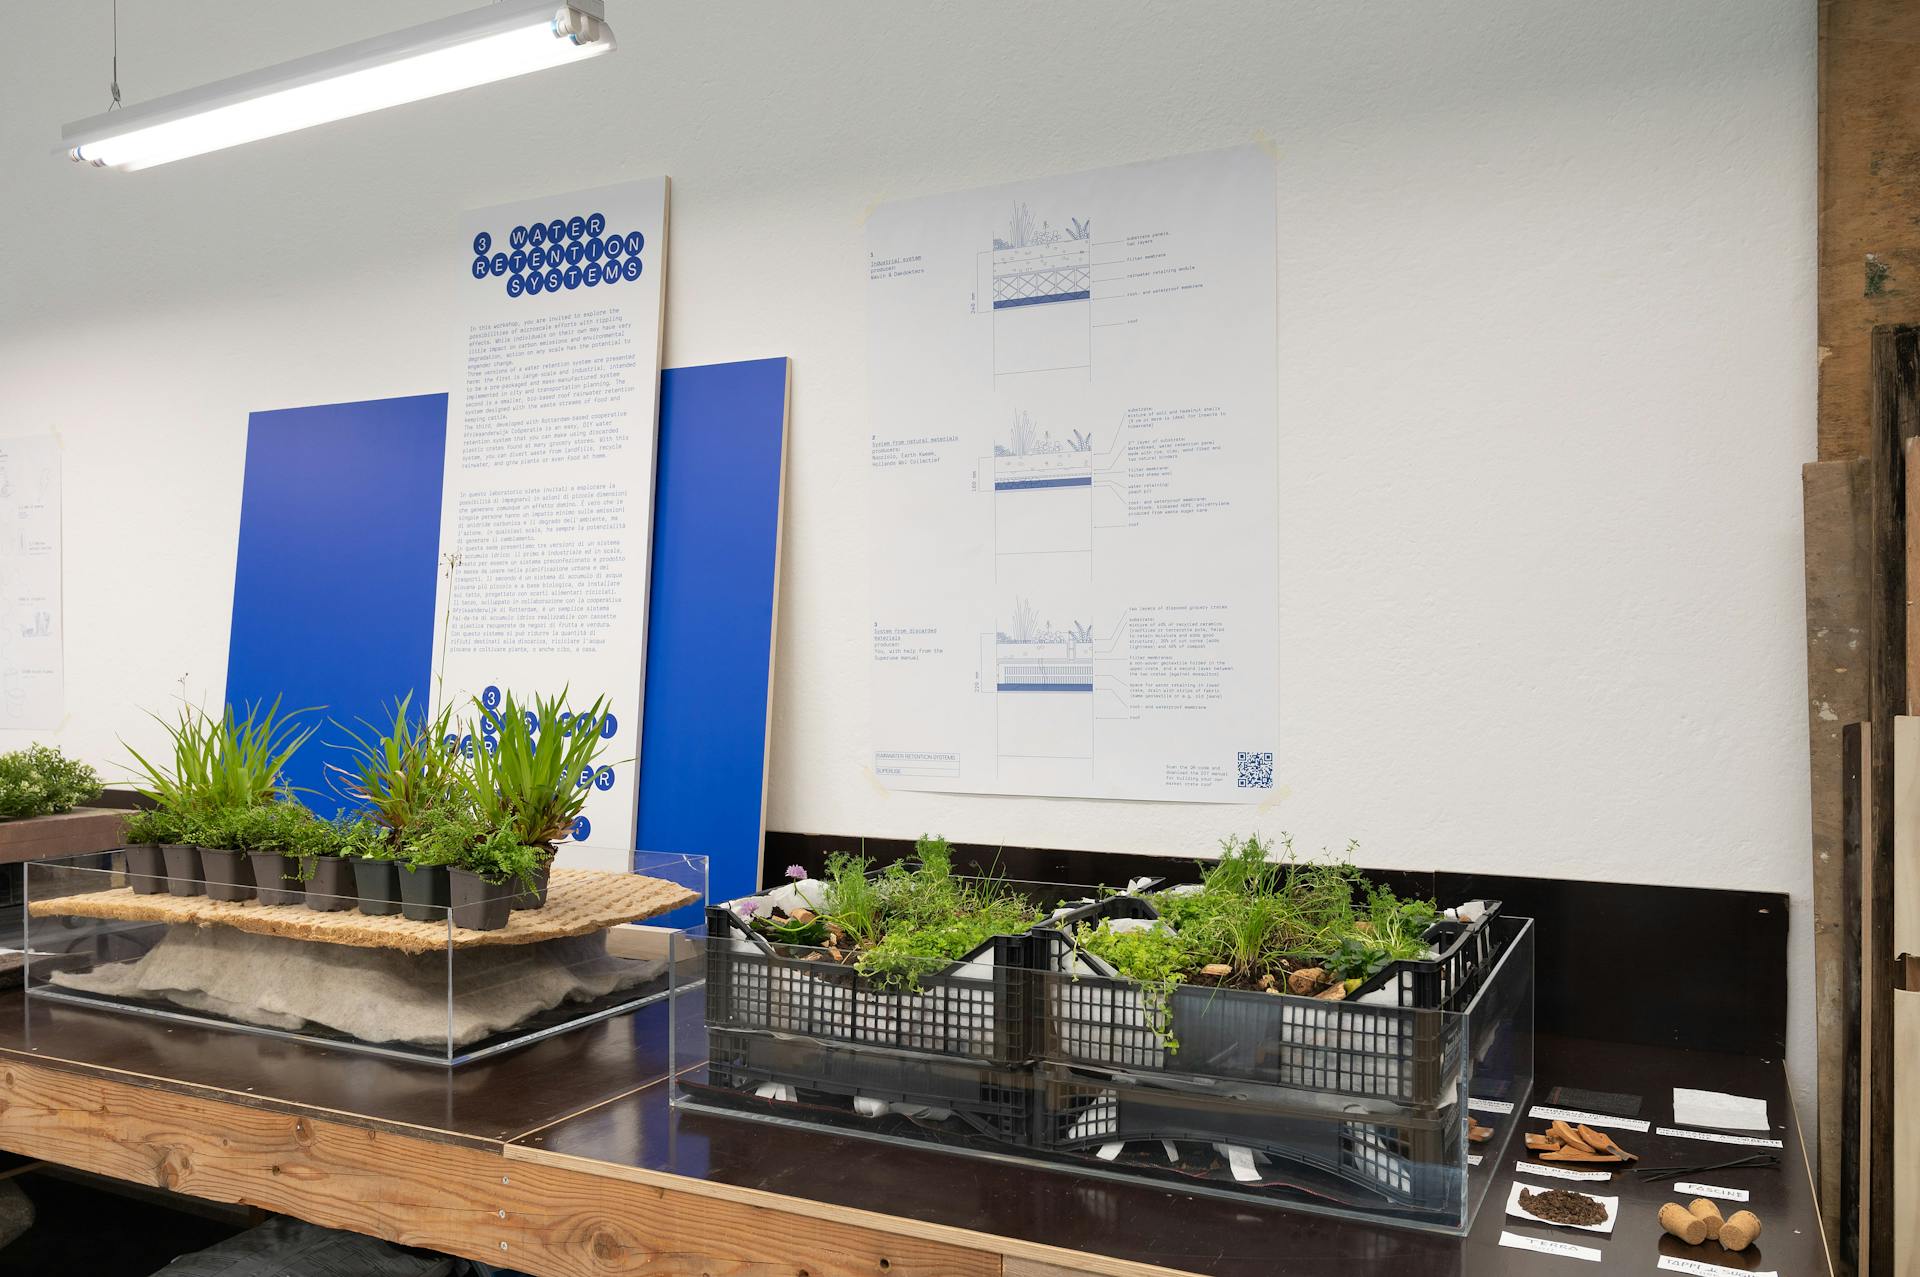 Working desk with plants in crates.